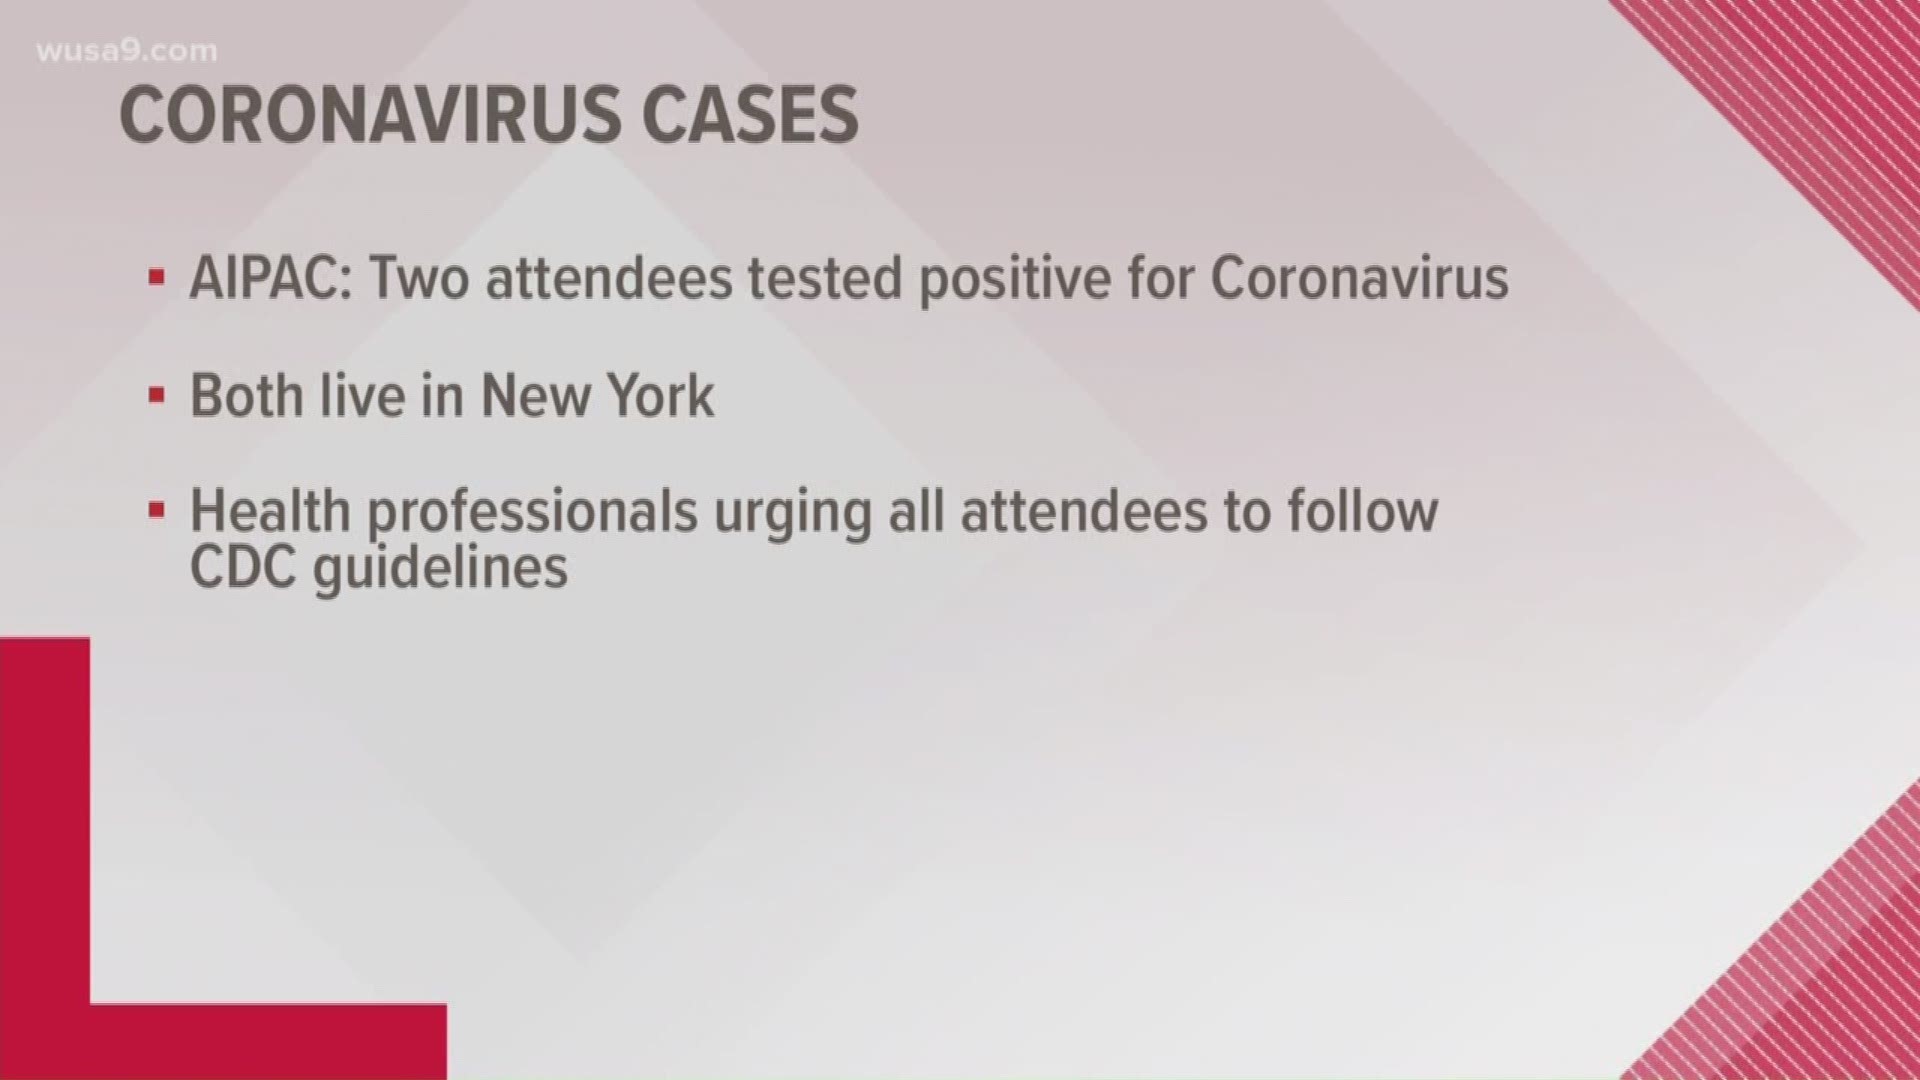 AIPAC previously informed conference attendees that a group from New York had "potential contact prior to the conference with individual who contracted coronavirus."